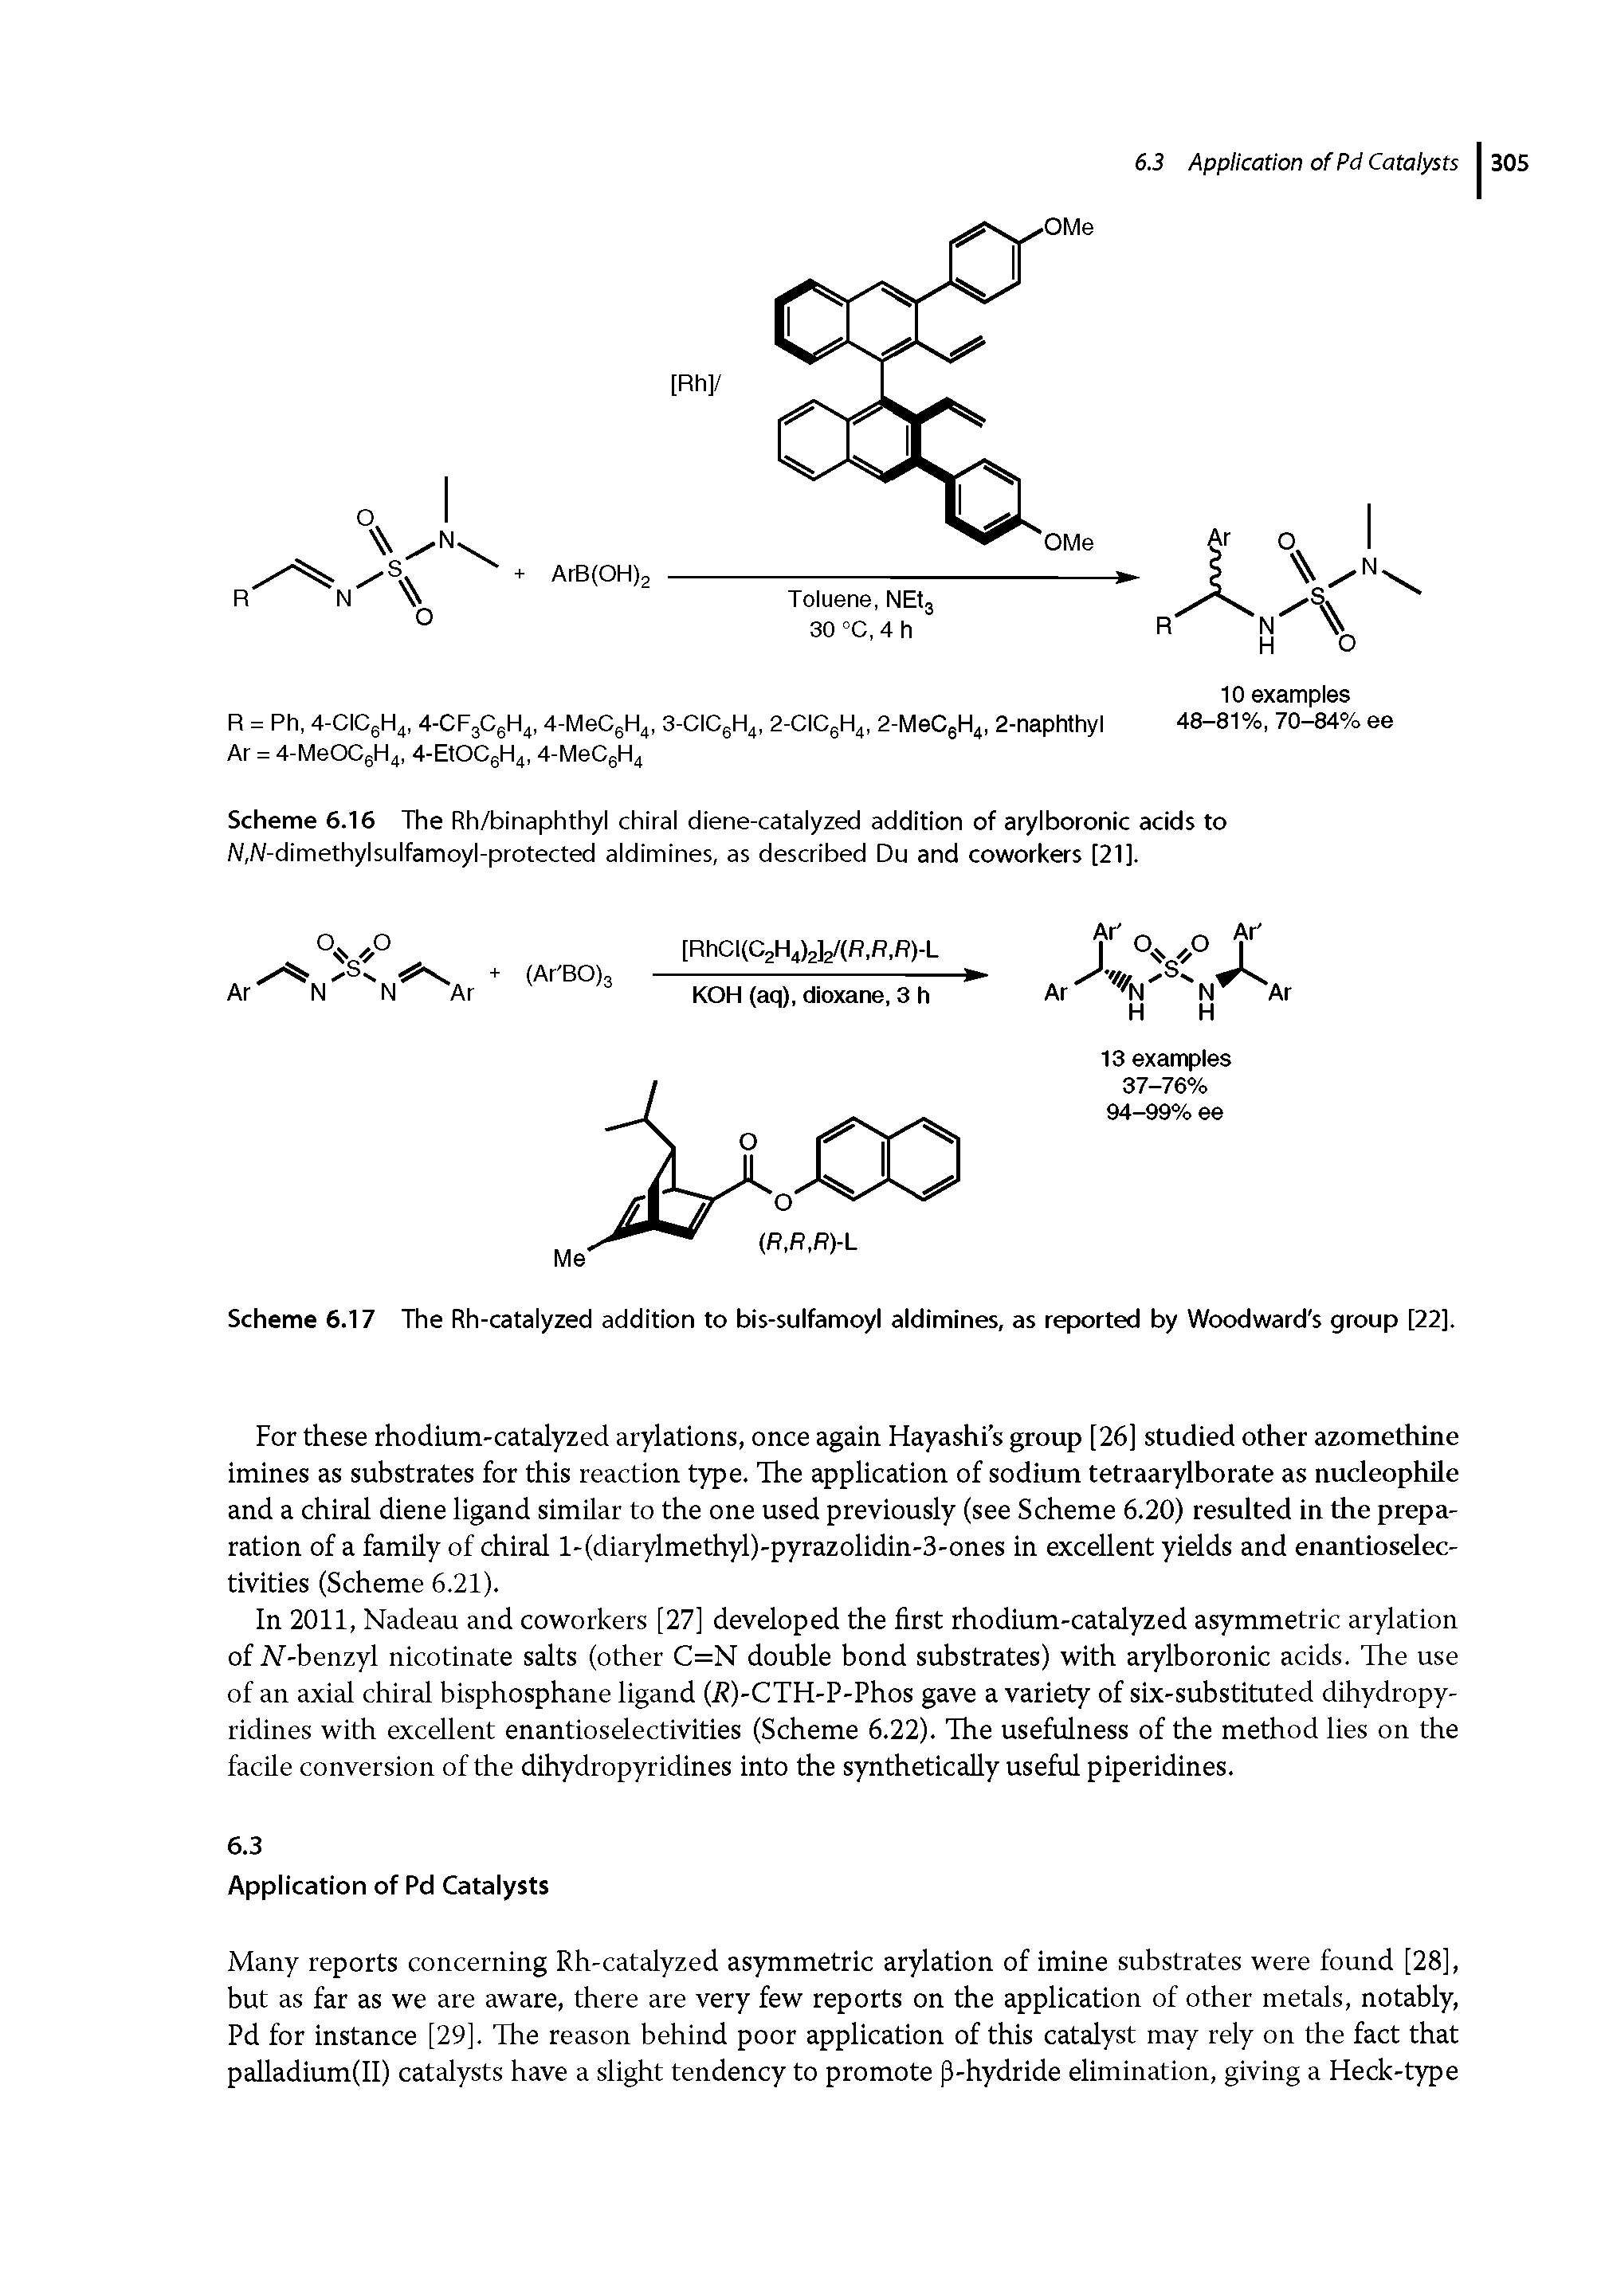 Scheme 6.16 The Rh/binaphthyl chiral diene-catalyzed addition of arylboronic acids to W,W-dimethylsulfamoyl-protected aldimines, as described Du and coworkers [21].